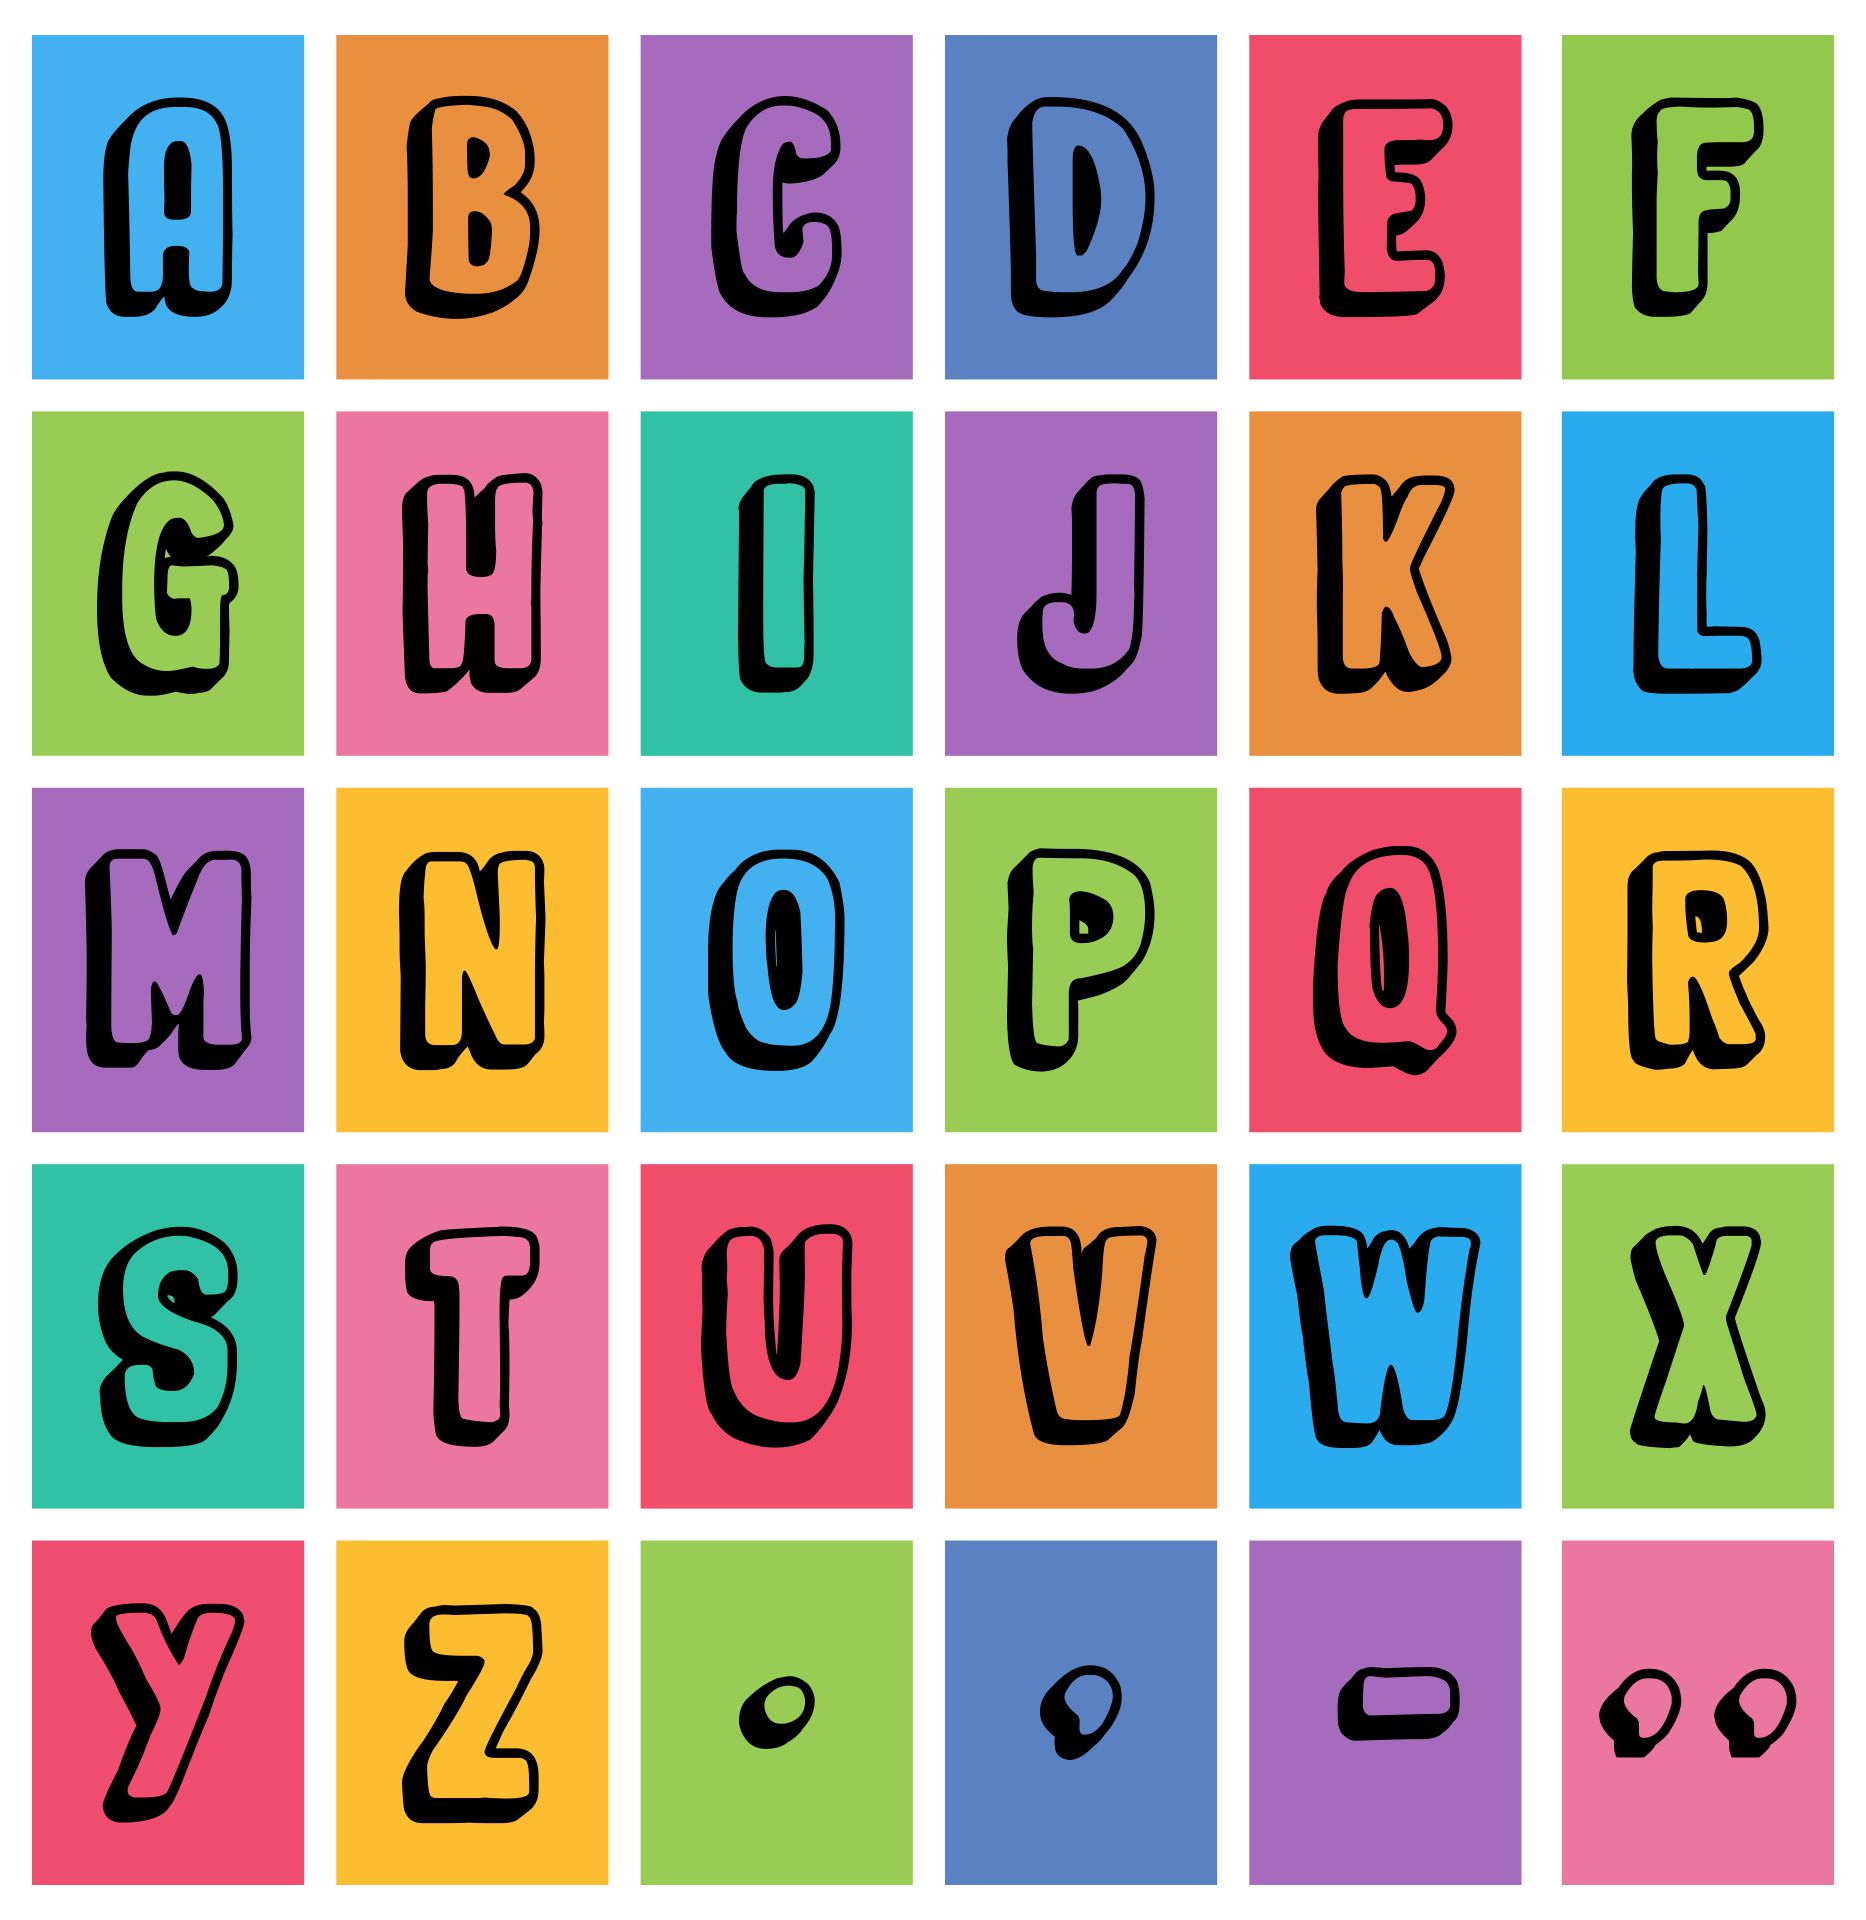 Printable Bulletin Board Letters A-Z For Classroom Or Home